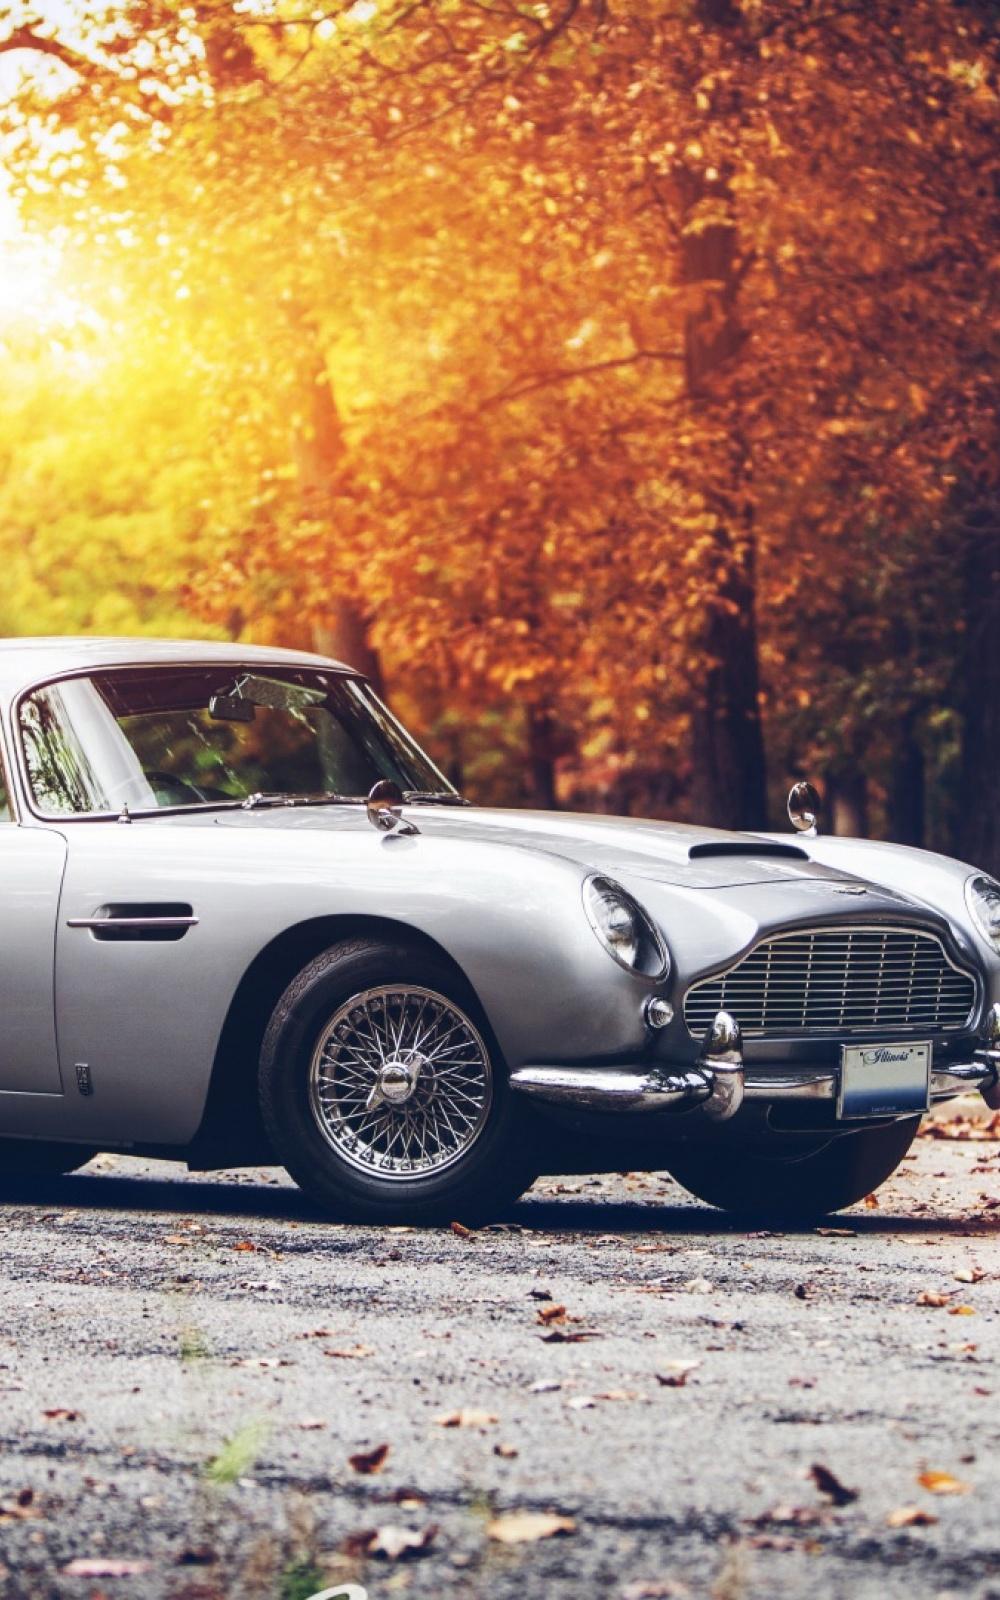 Classic Old School Car Autumn Light Android Wallpaper free